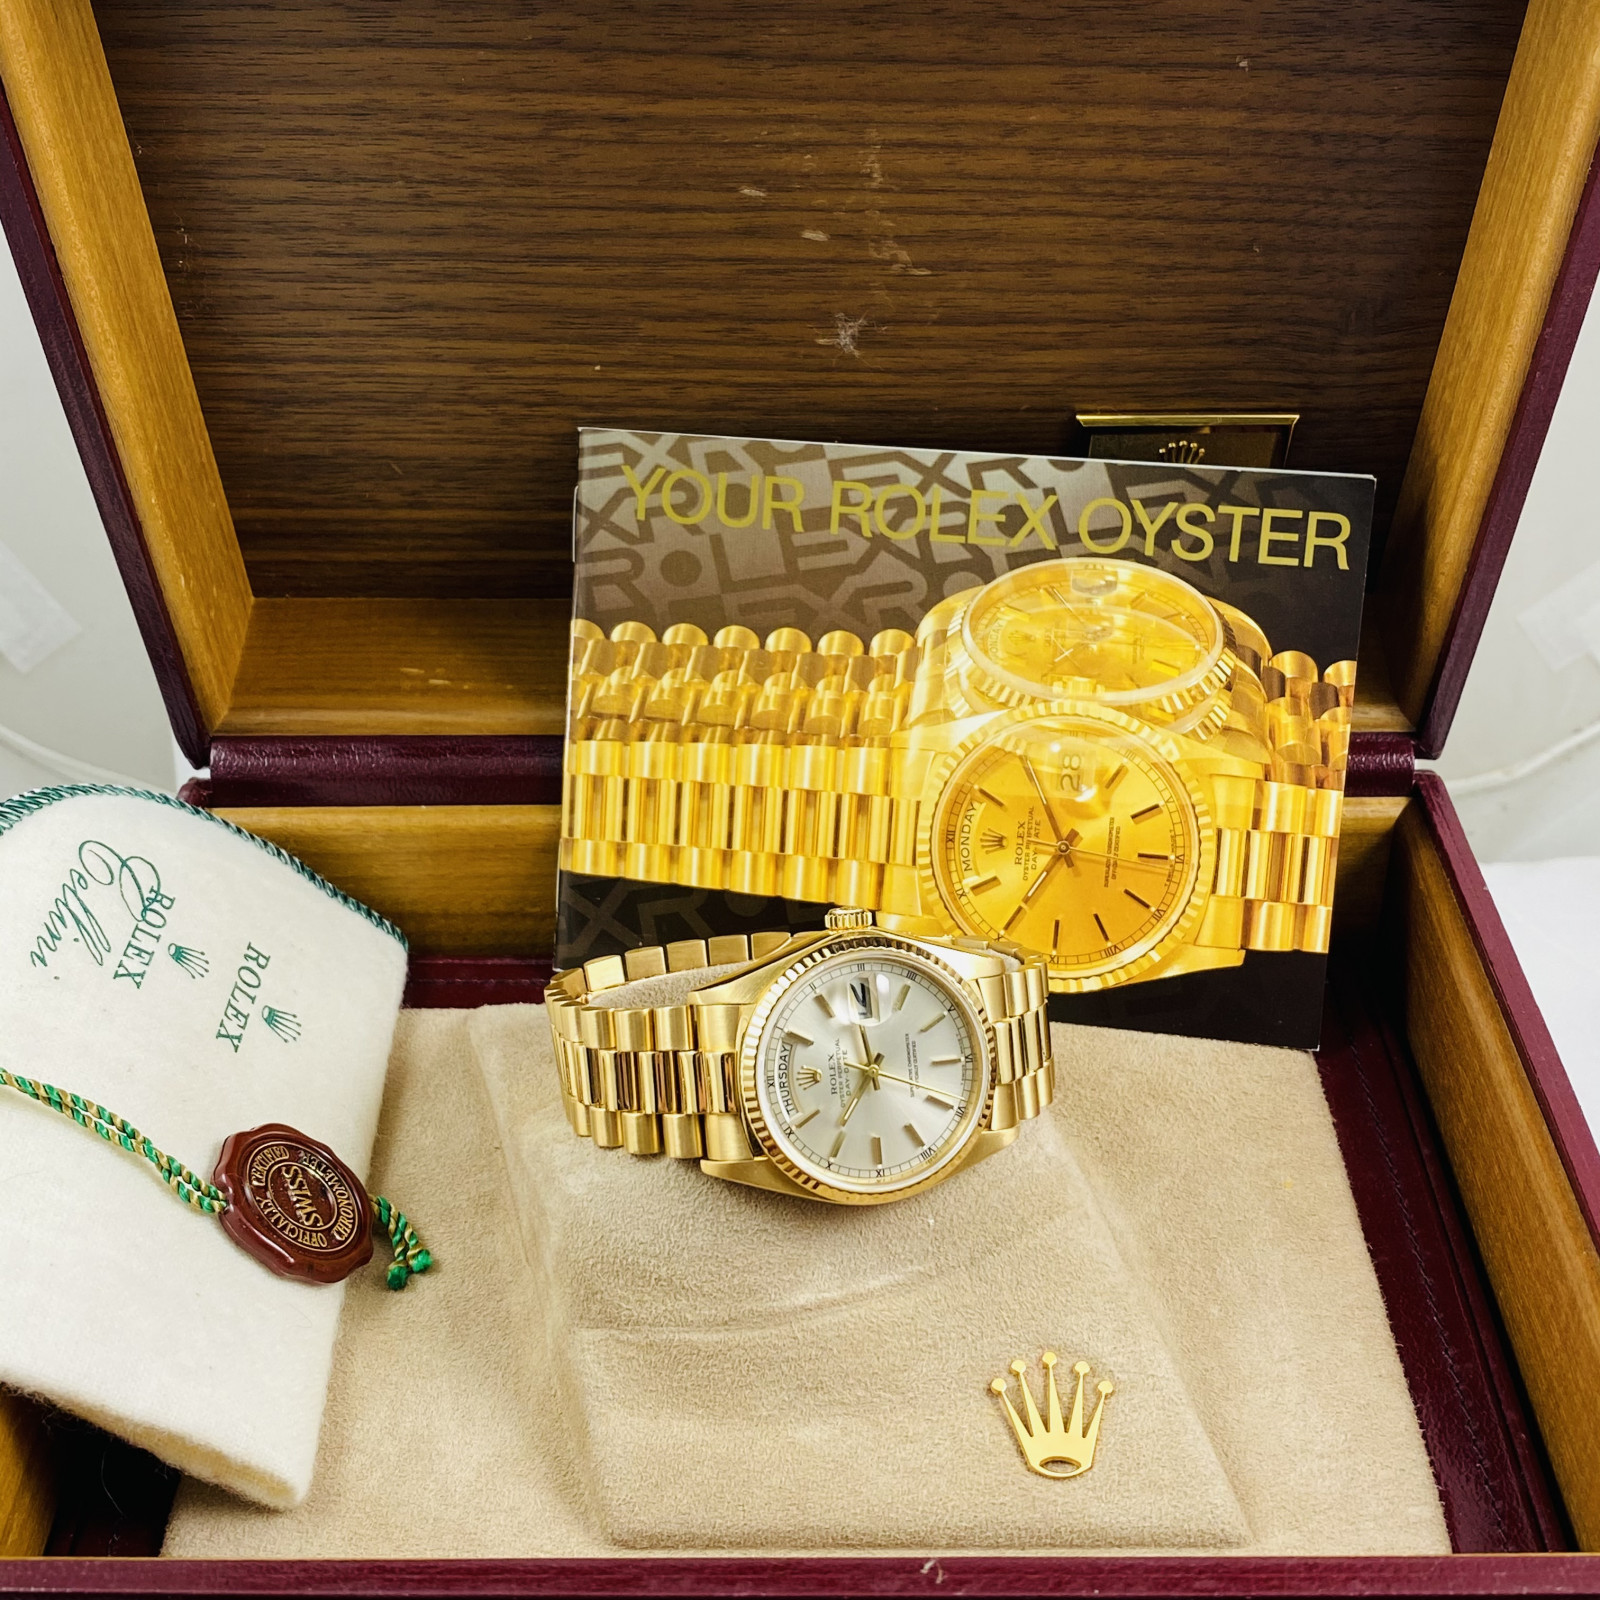 Pre-Owned Rolex Day-Date 18038